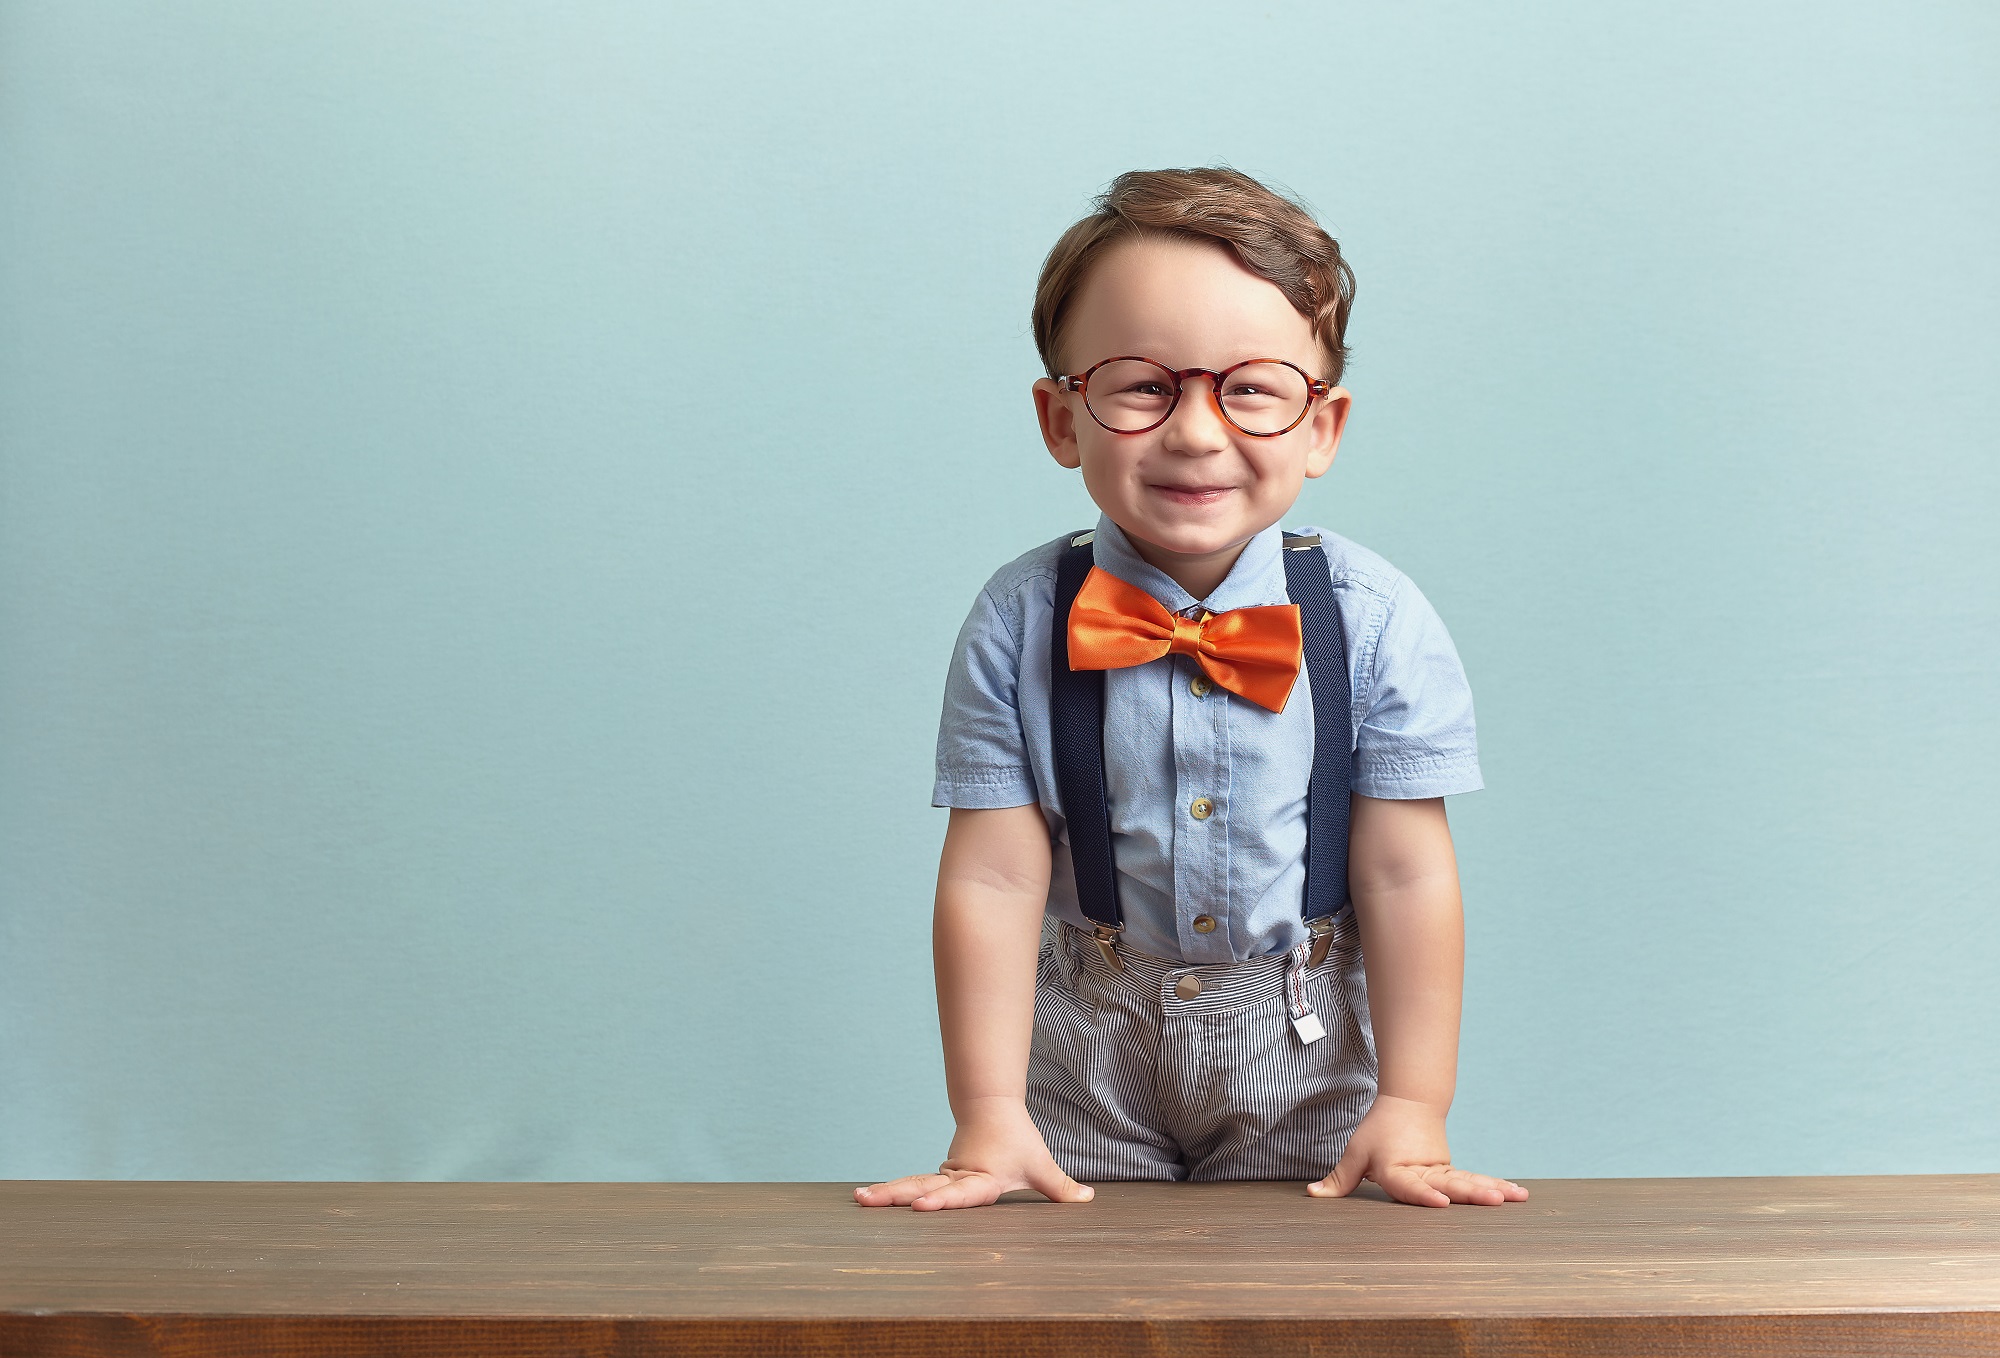 A smiling little boy wearing a orange bowtie and glasses